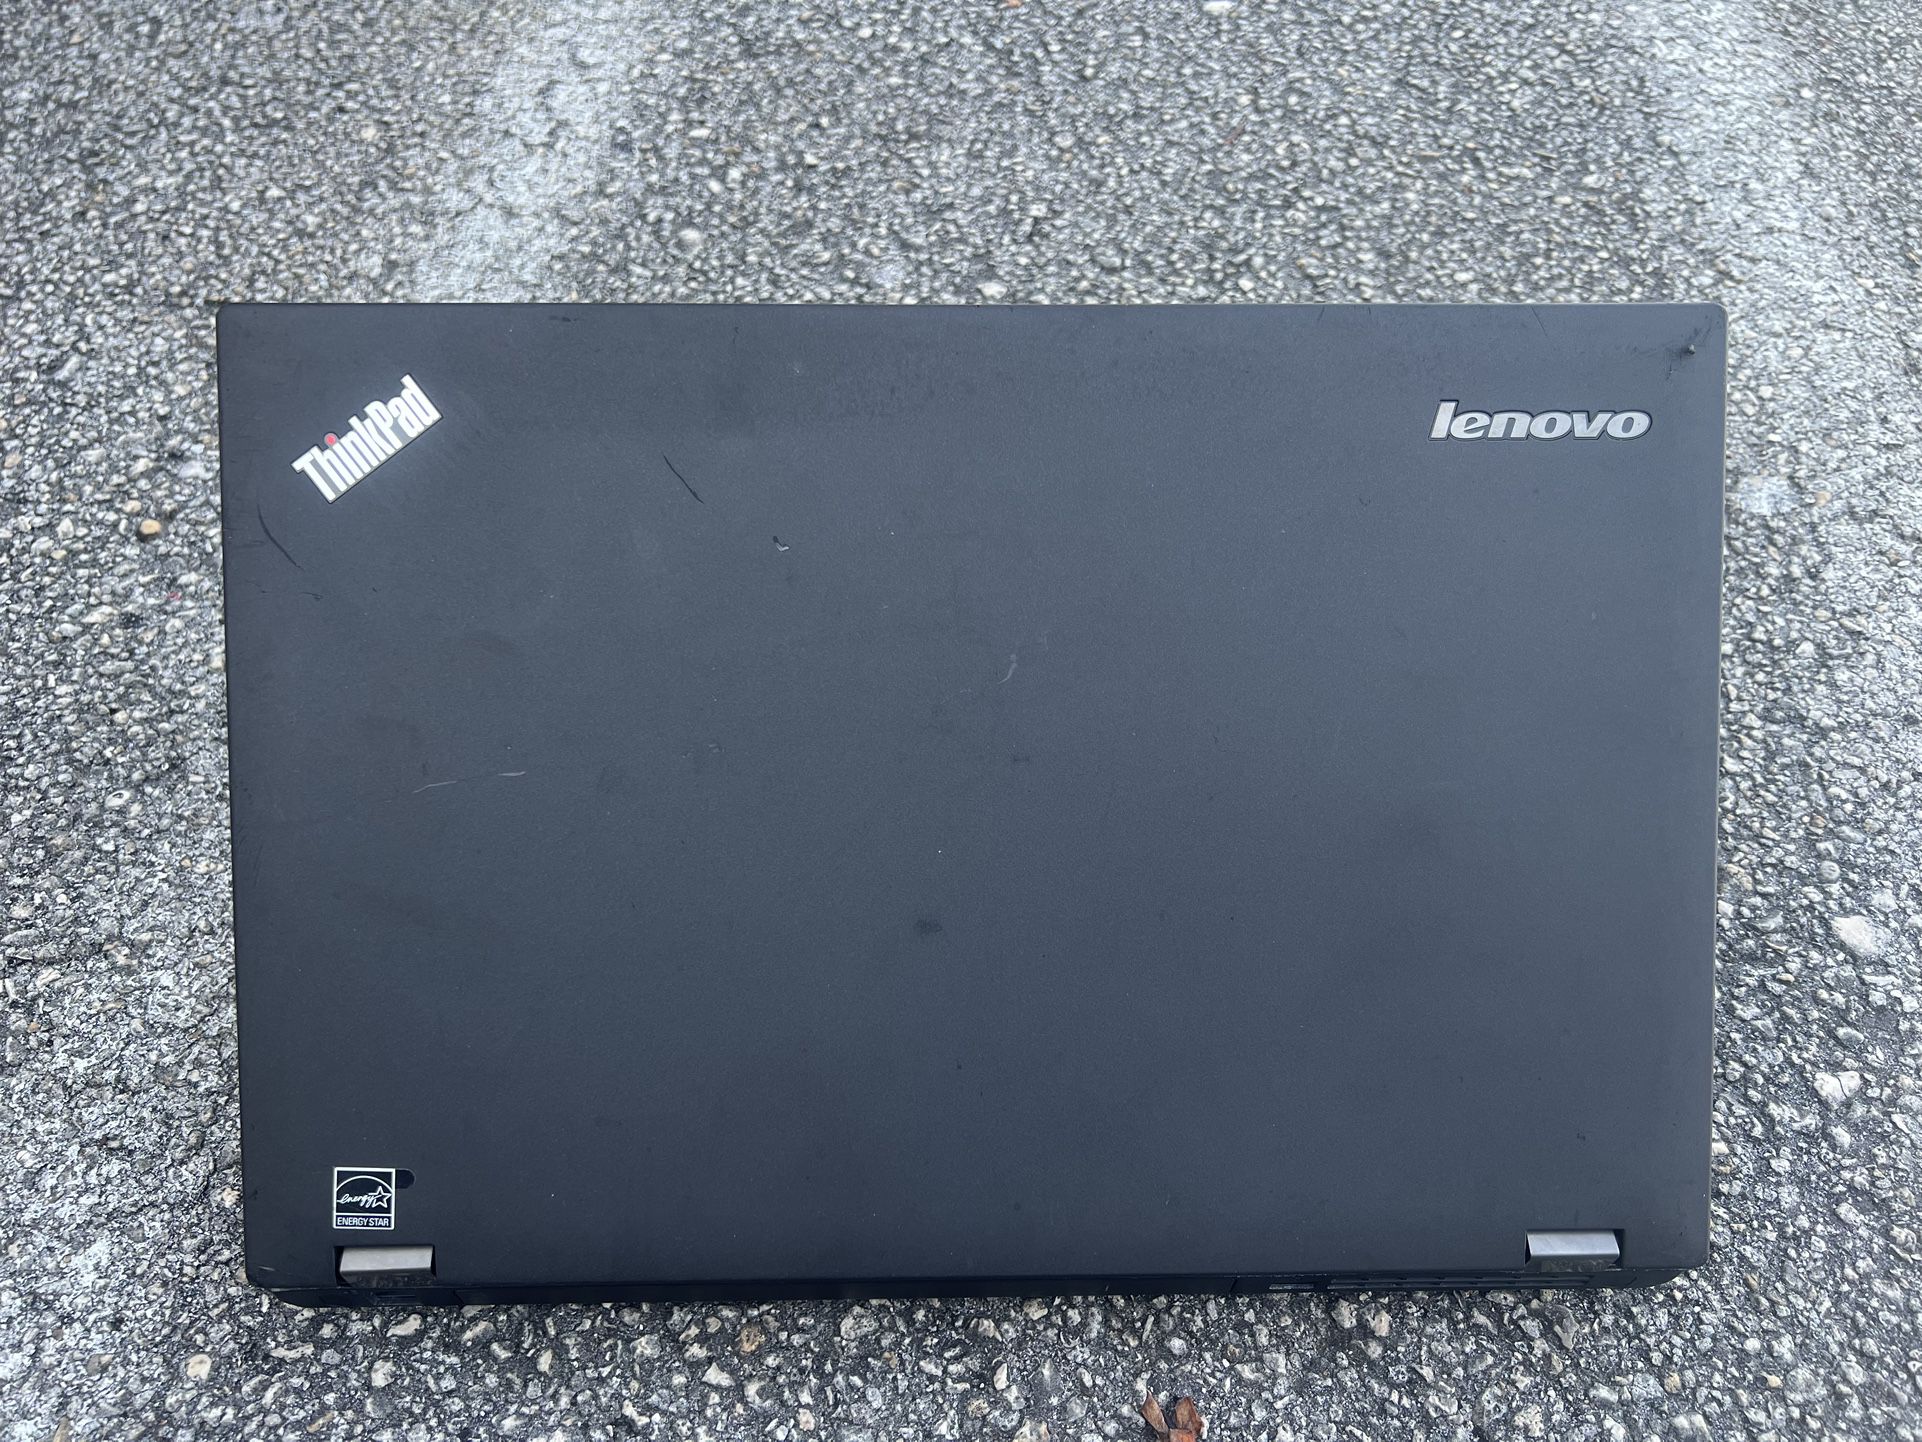 A Good Working Lenovo Laptop Windows 10 Pro   /500 Gig Hard Drive /4 Gig Ram Good Battery And New Charger  Complete With Everything